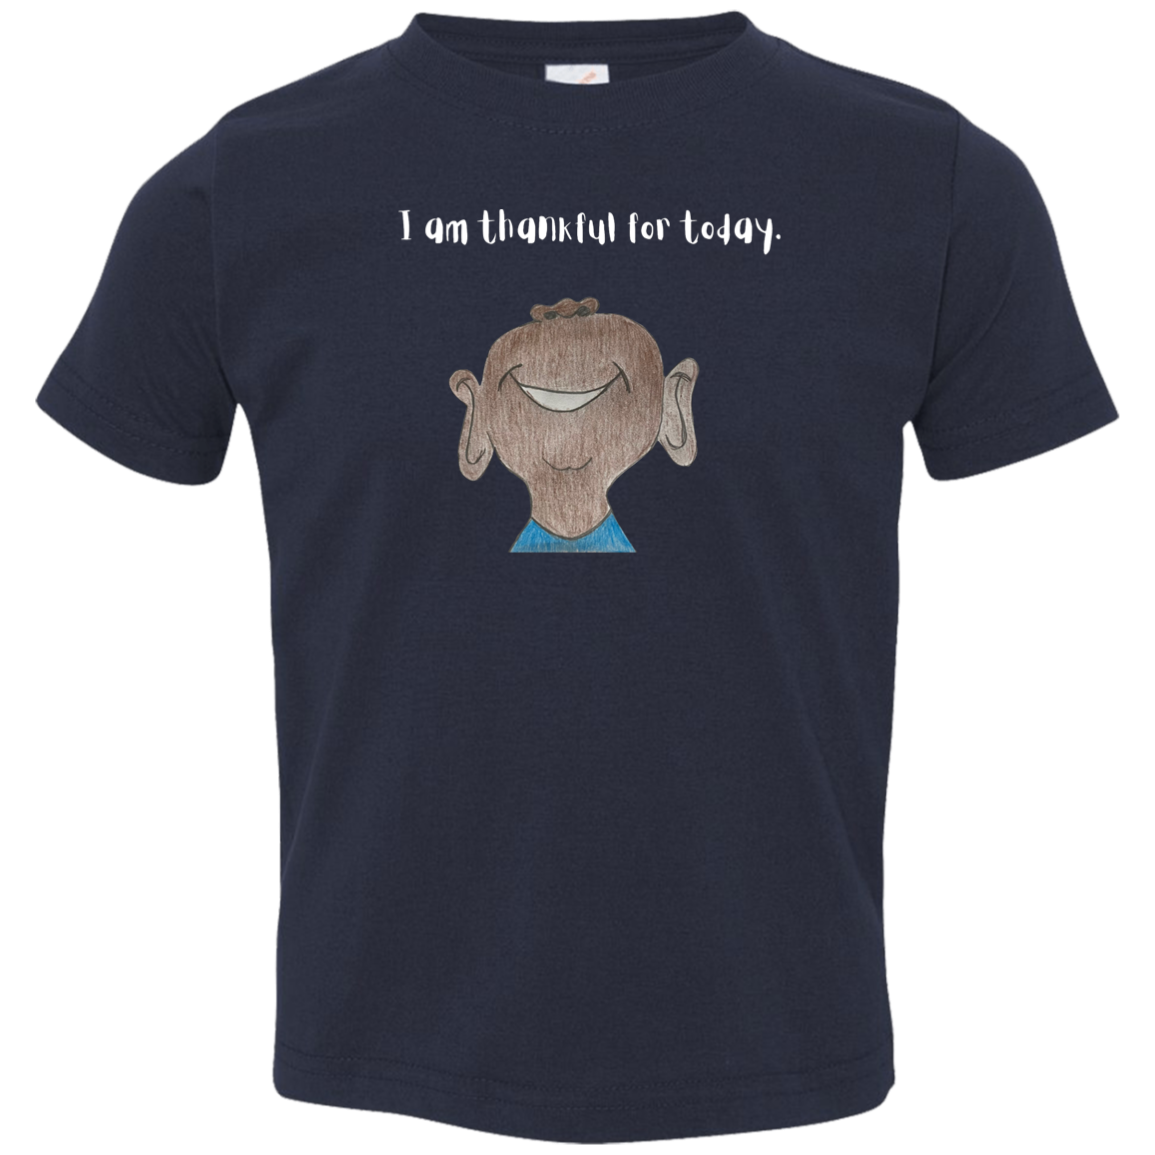 I am thankful for today Toddler Jersey T-Shirt